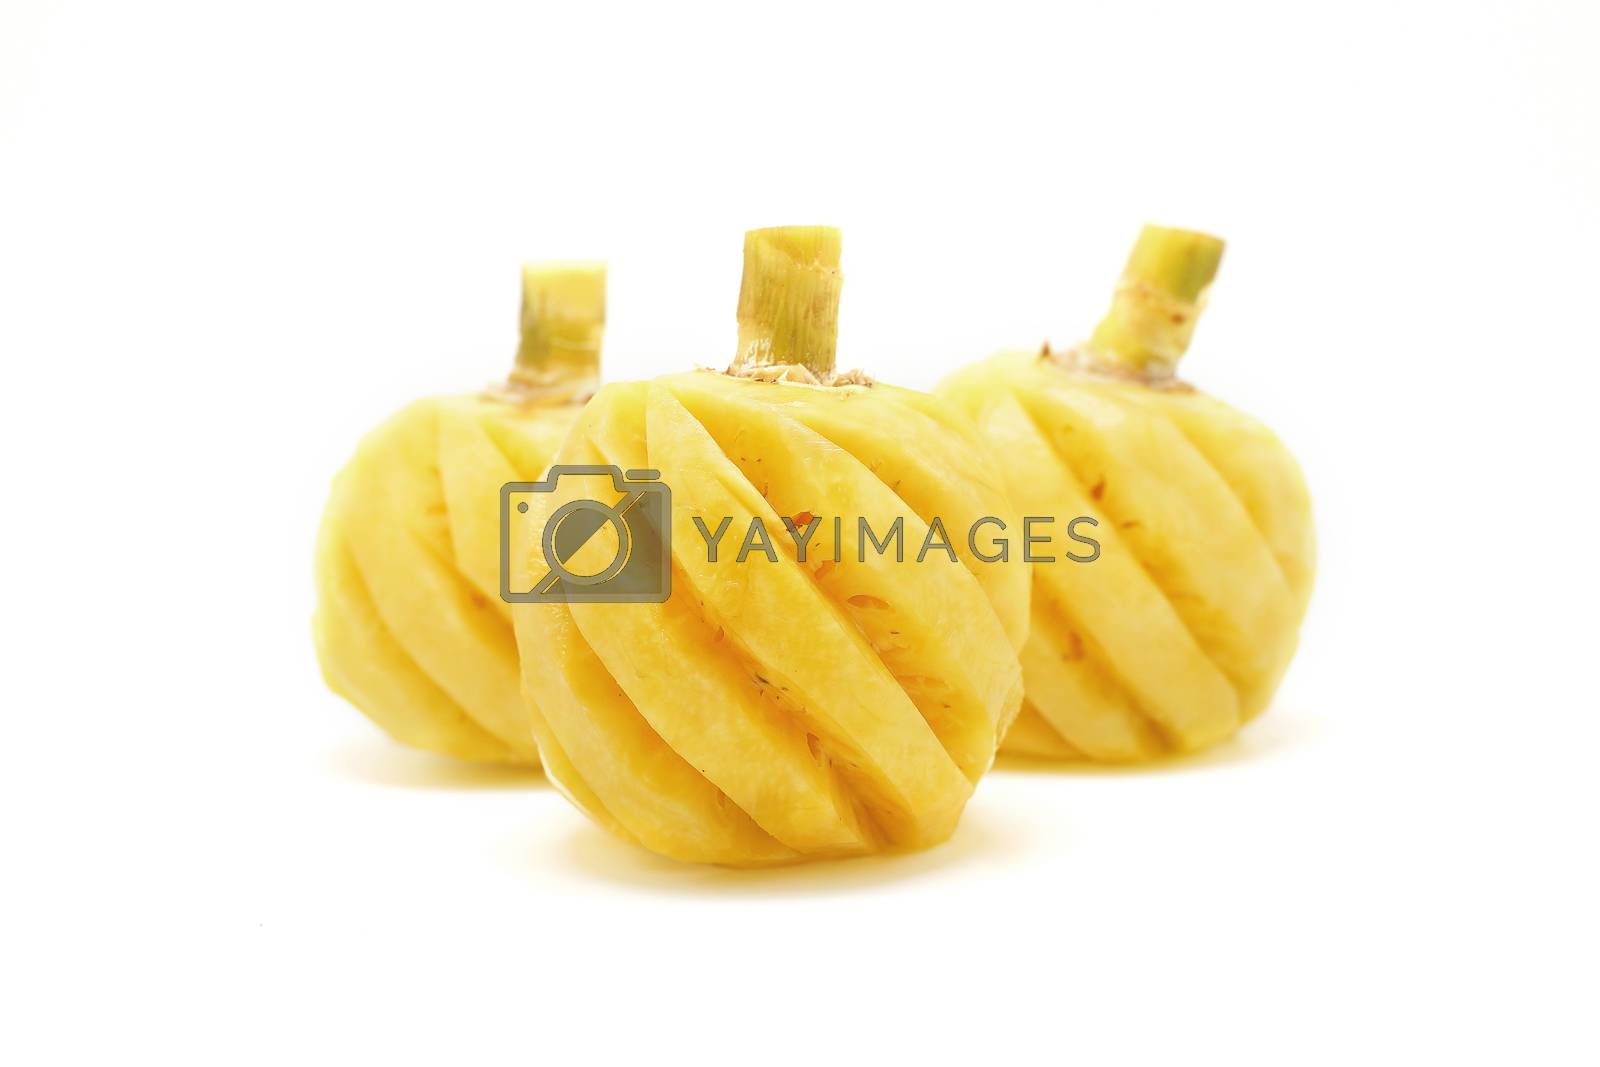 Royalty free image of peeled pineapple on white background by leisuretime70